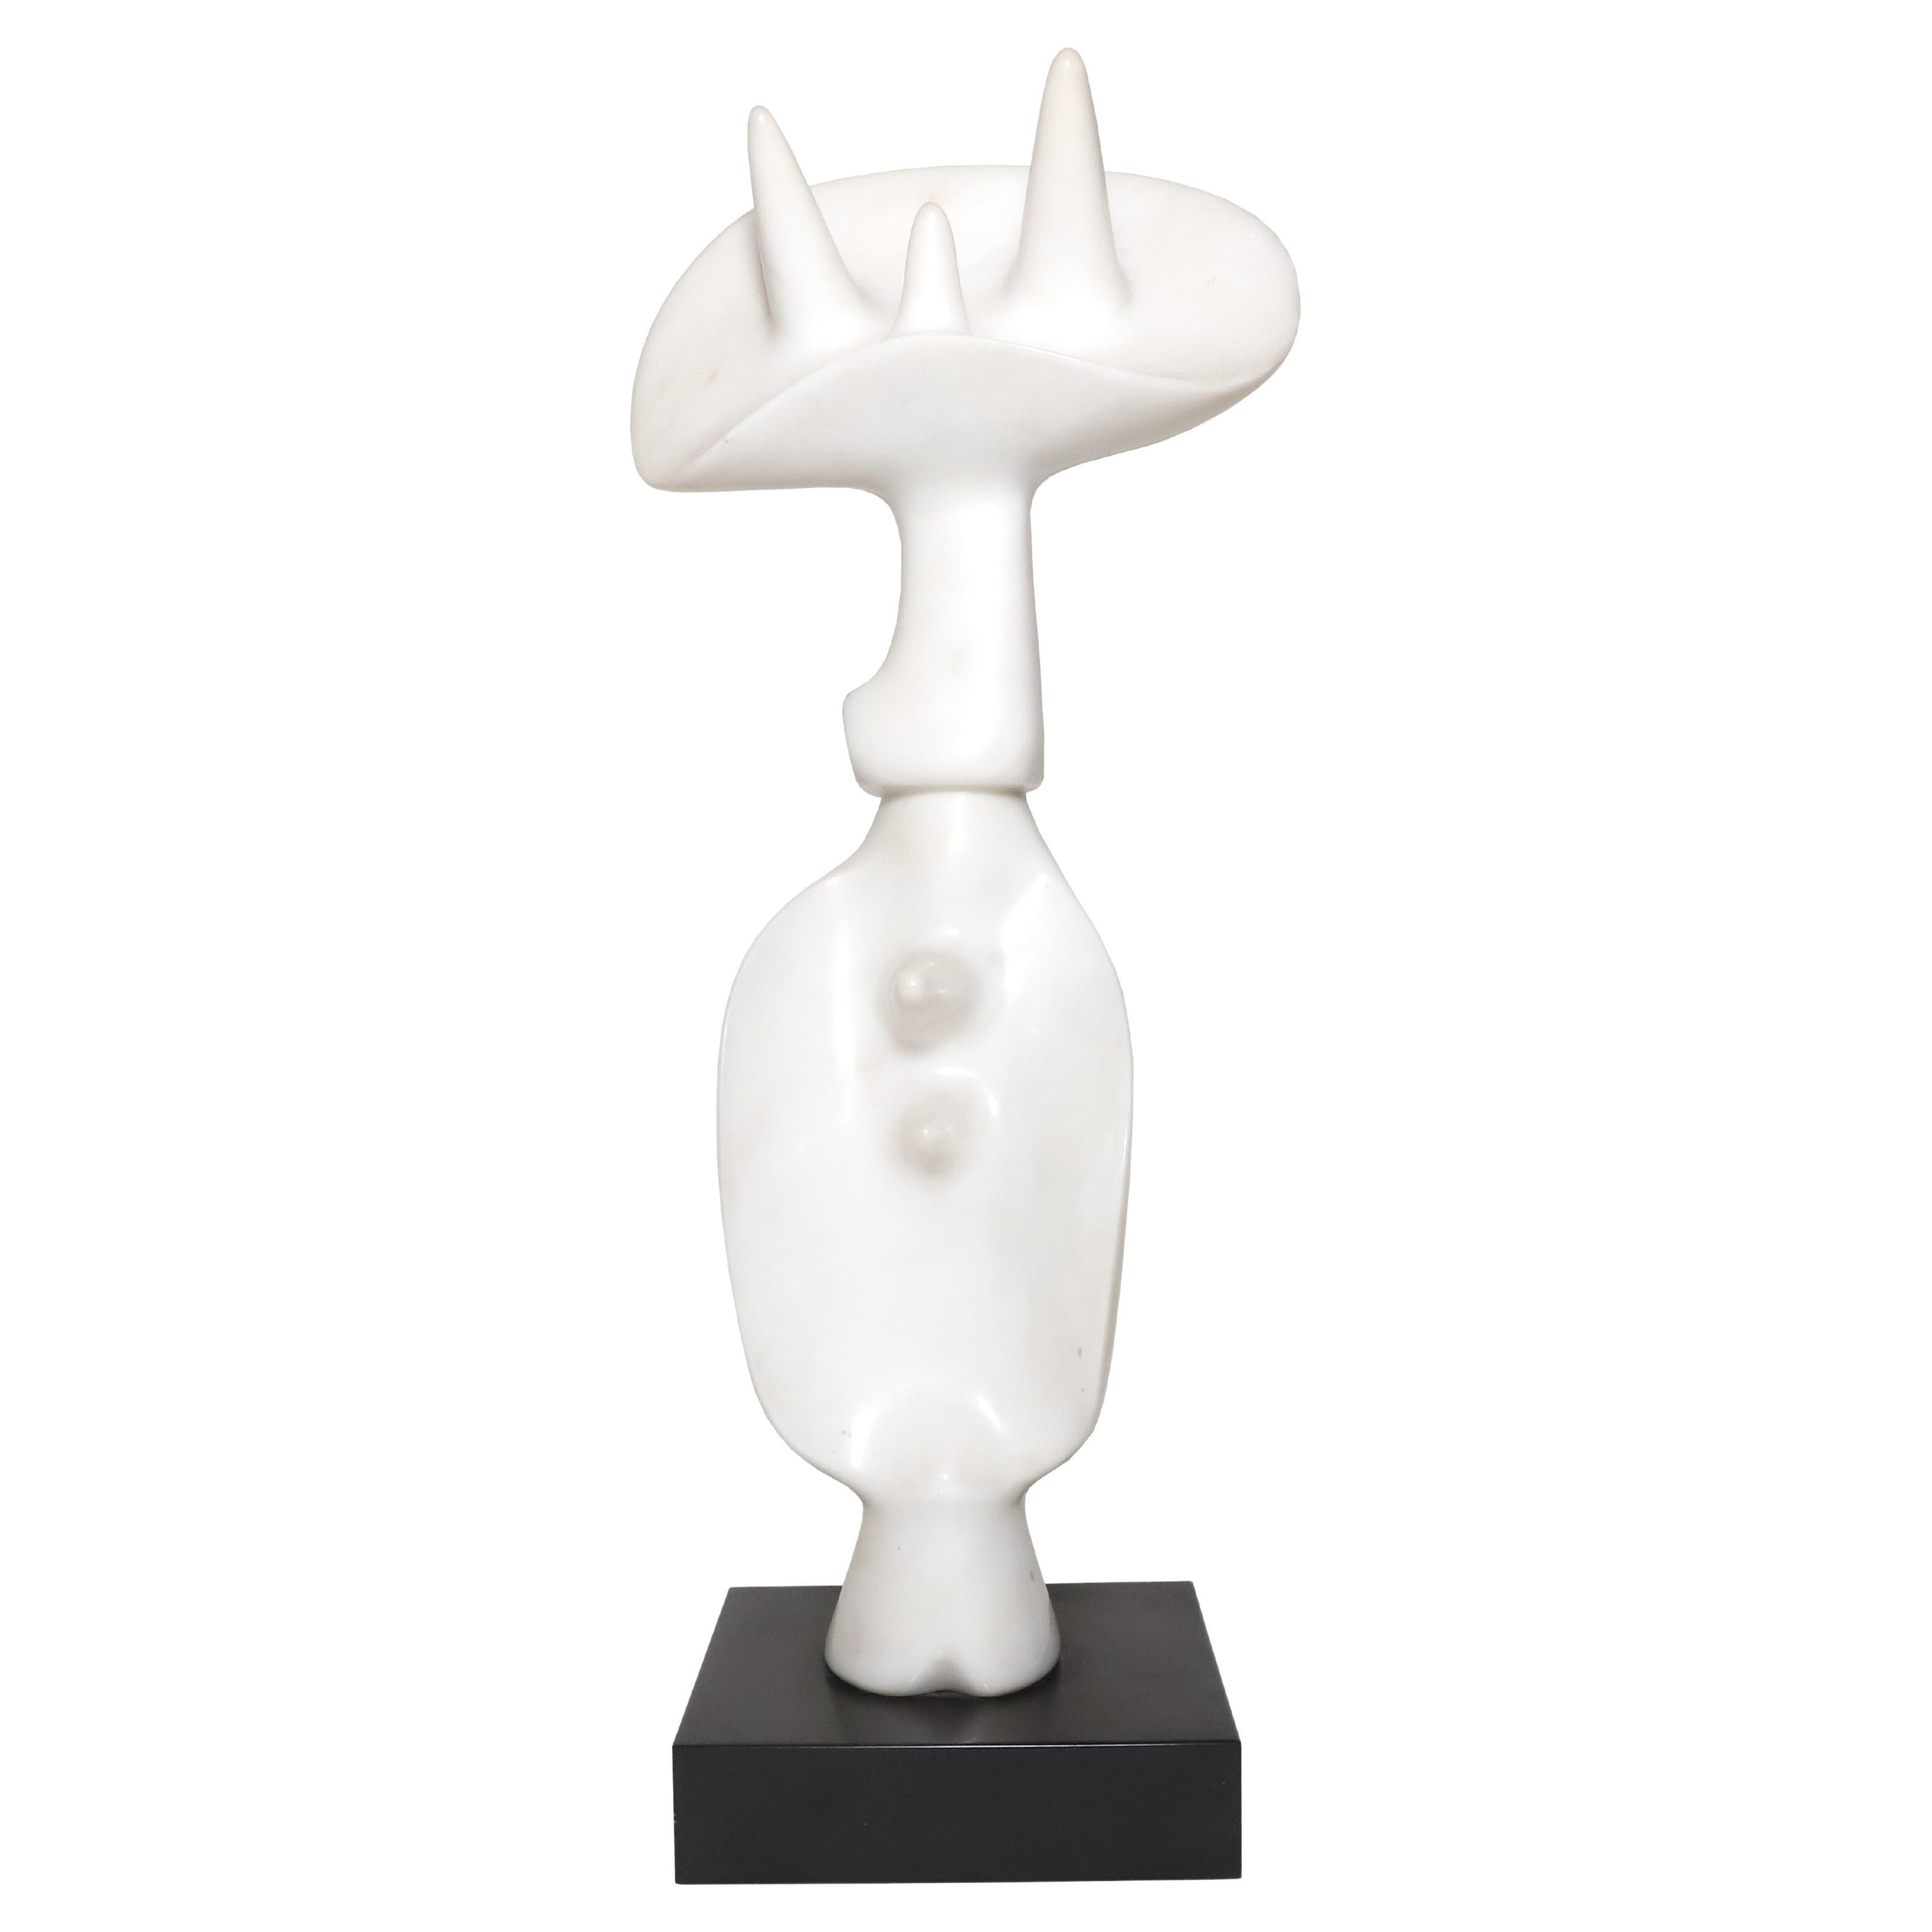 1976 "Chinere" Carrara Marble Sculpture by Victor Roman - Signed